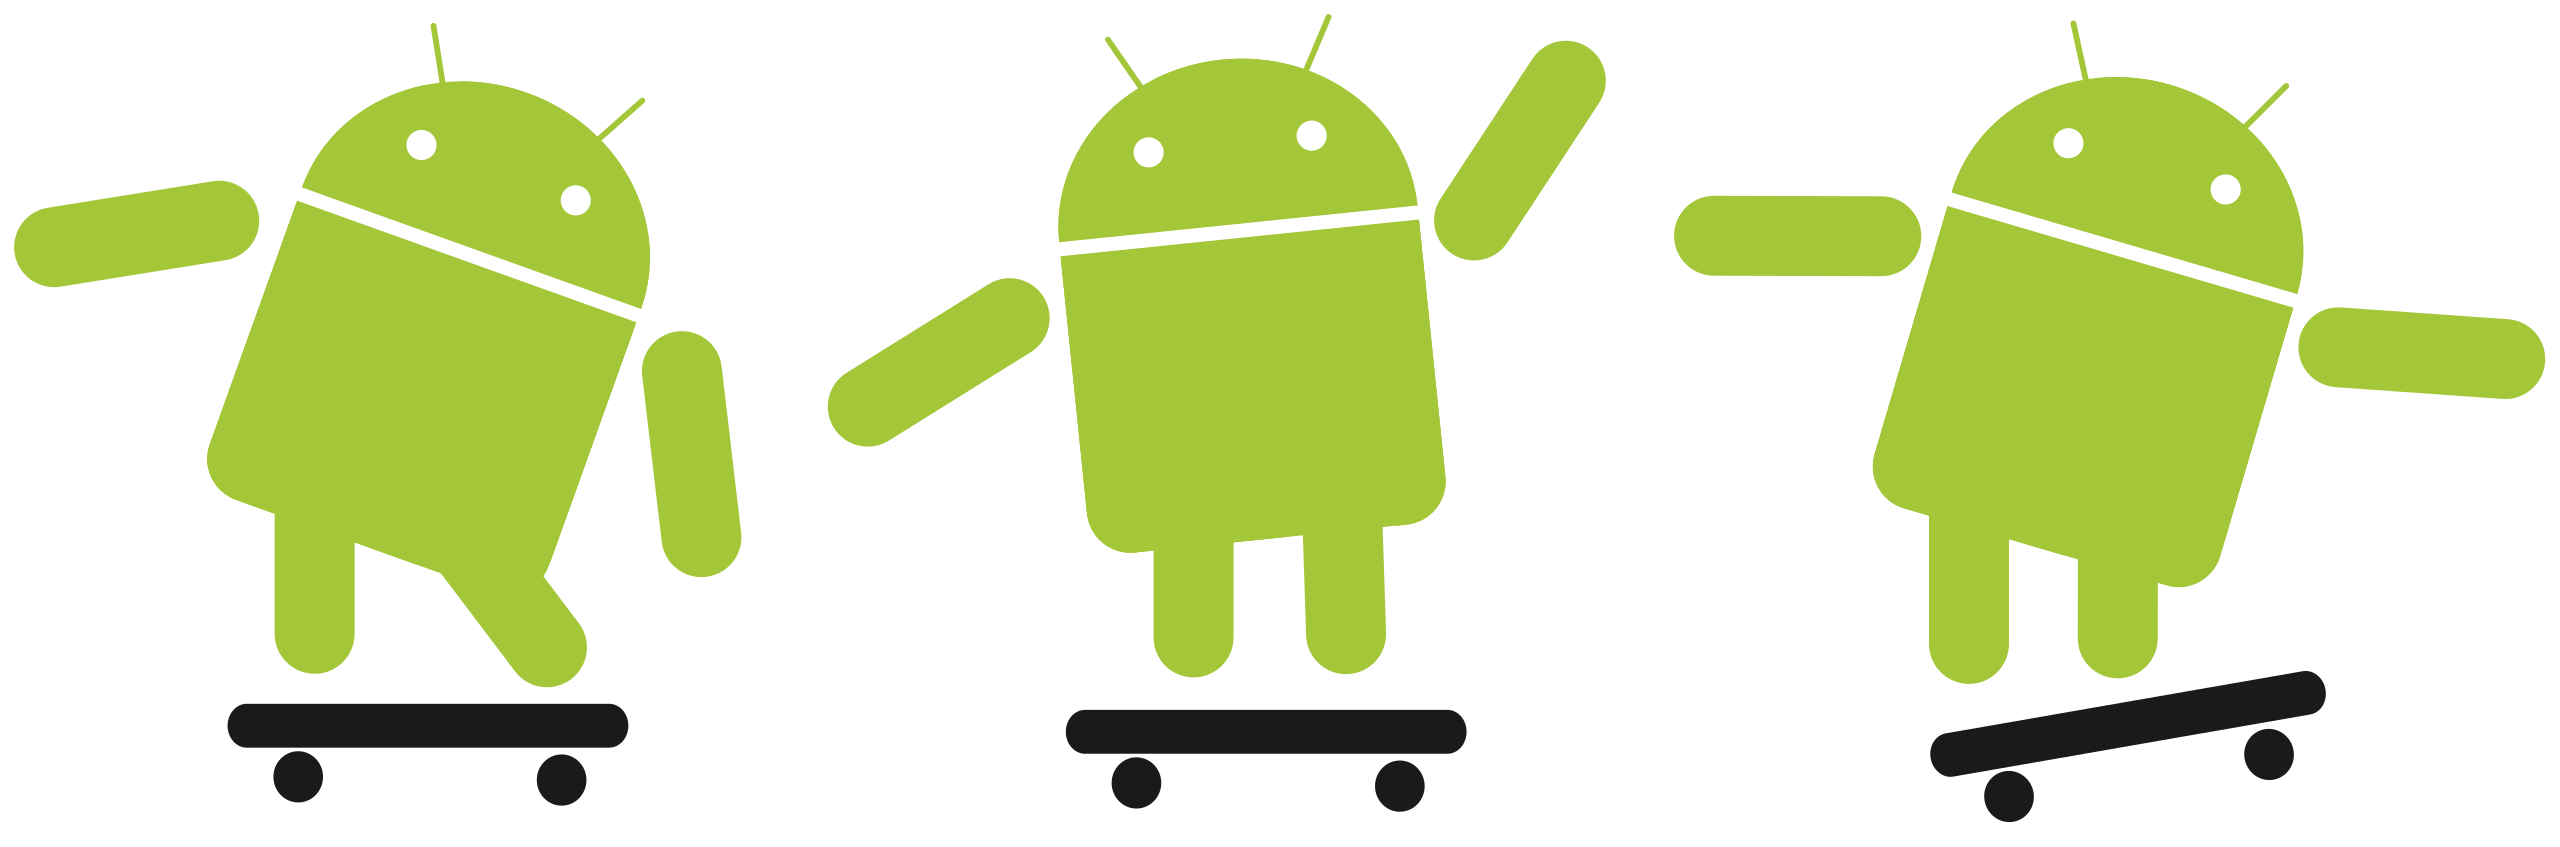 Android Robot Skateboarding PNG Pic